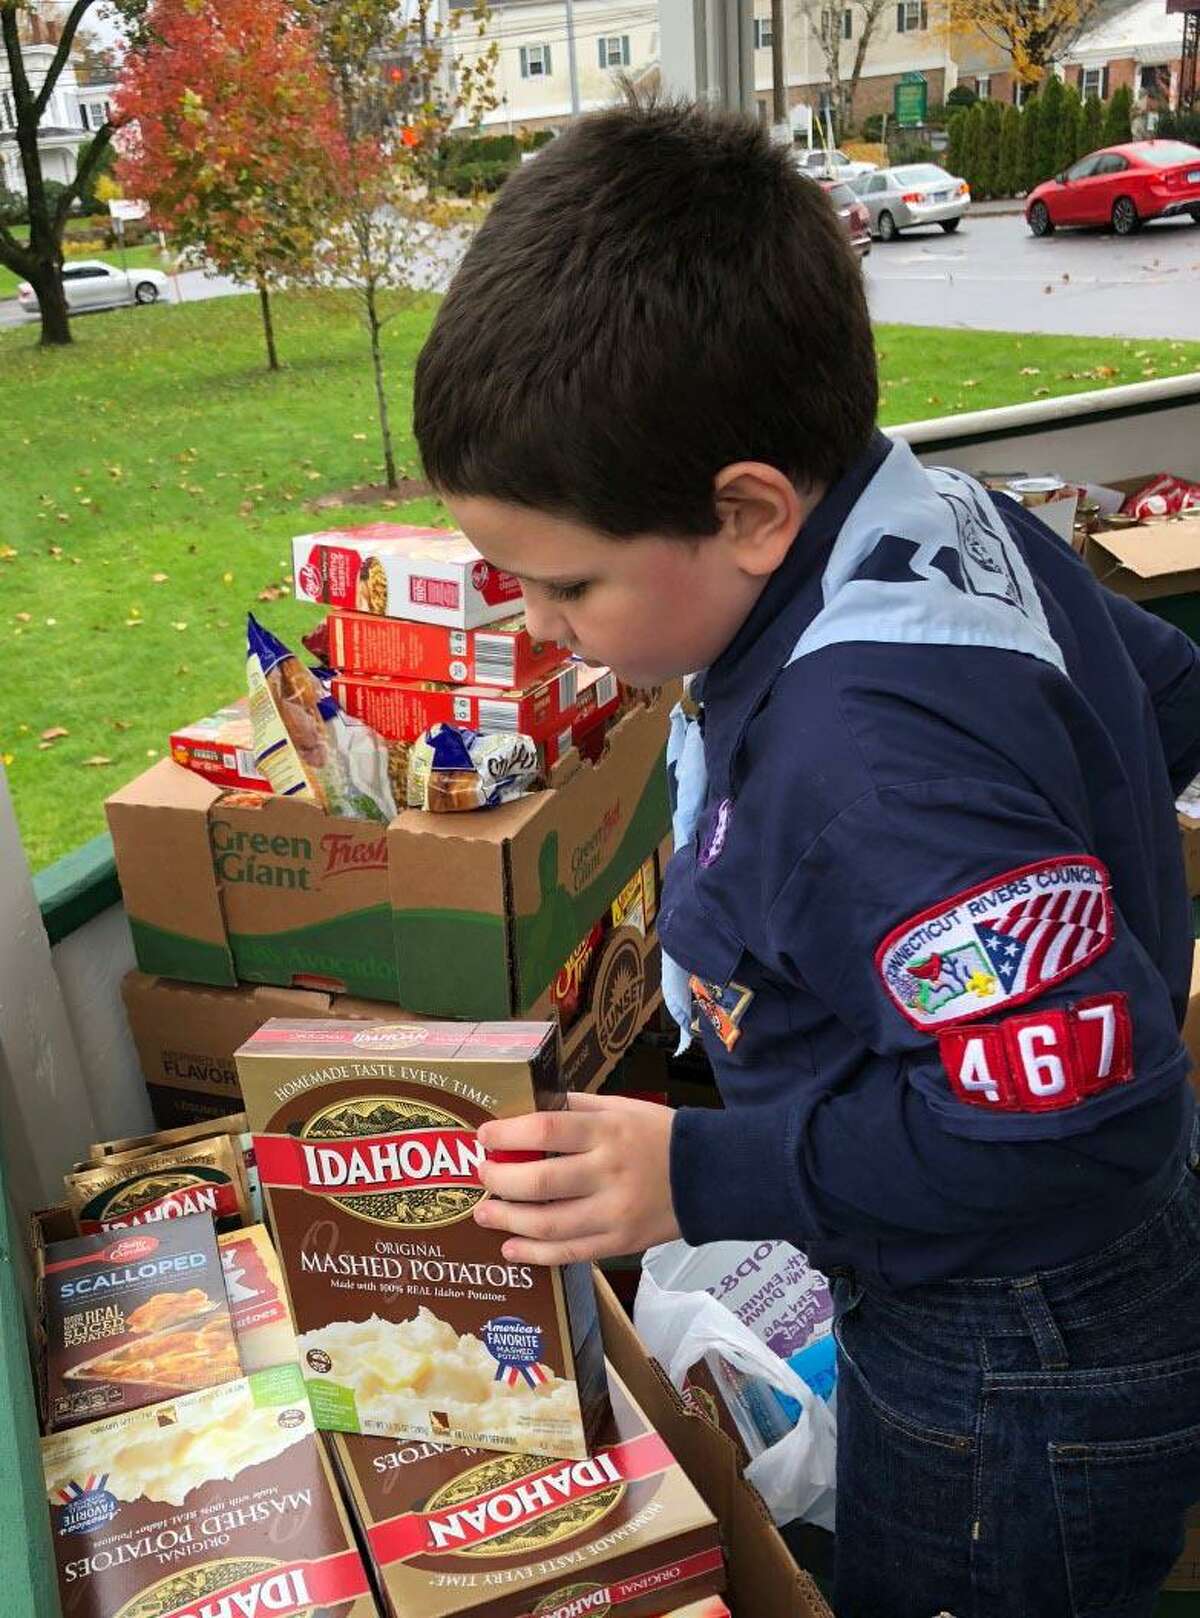 The Woman’s Club of Greater New Milford and the United Way of Western Connecticut will hold a food drive, “Operation Thanksgiving,” Nov. 7 near the bandstand on the Village Green. Above, Scout Nathan Brennen assists the group by checking expiration dates on donated goods during the 2018 event.